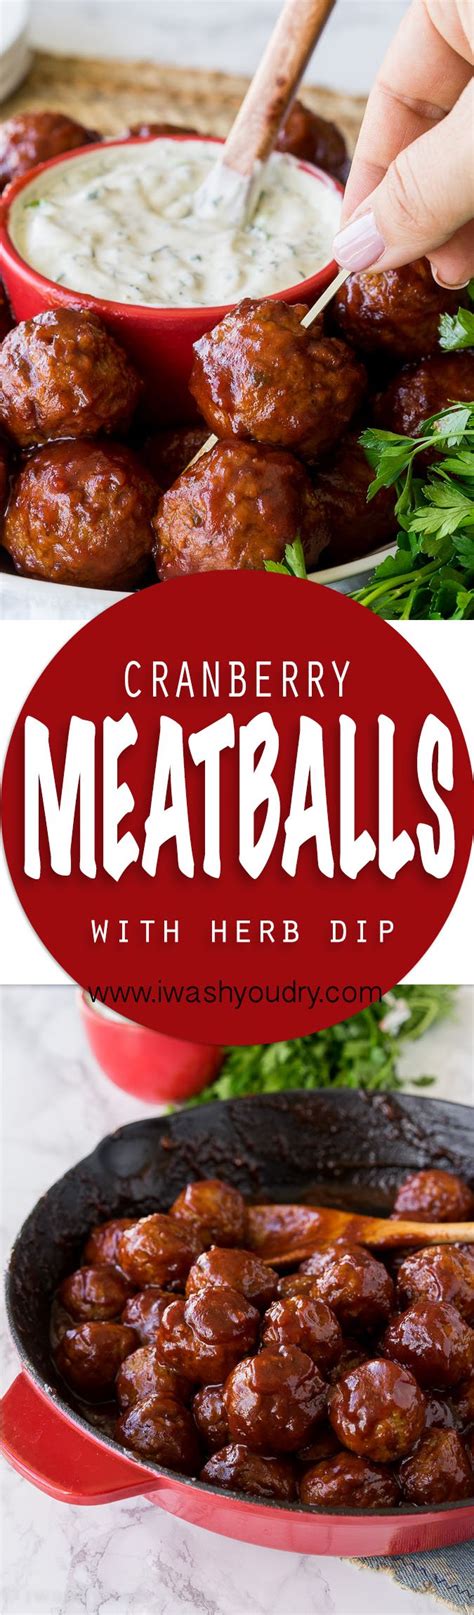 Cranberry Meatballs With Sour Cream Herb Dip I Wash You Dry